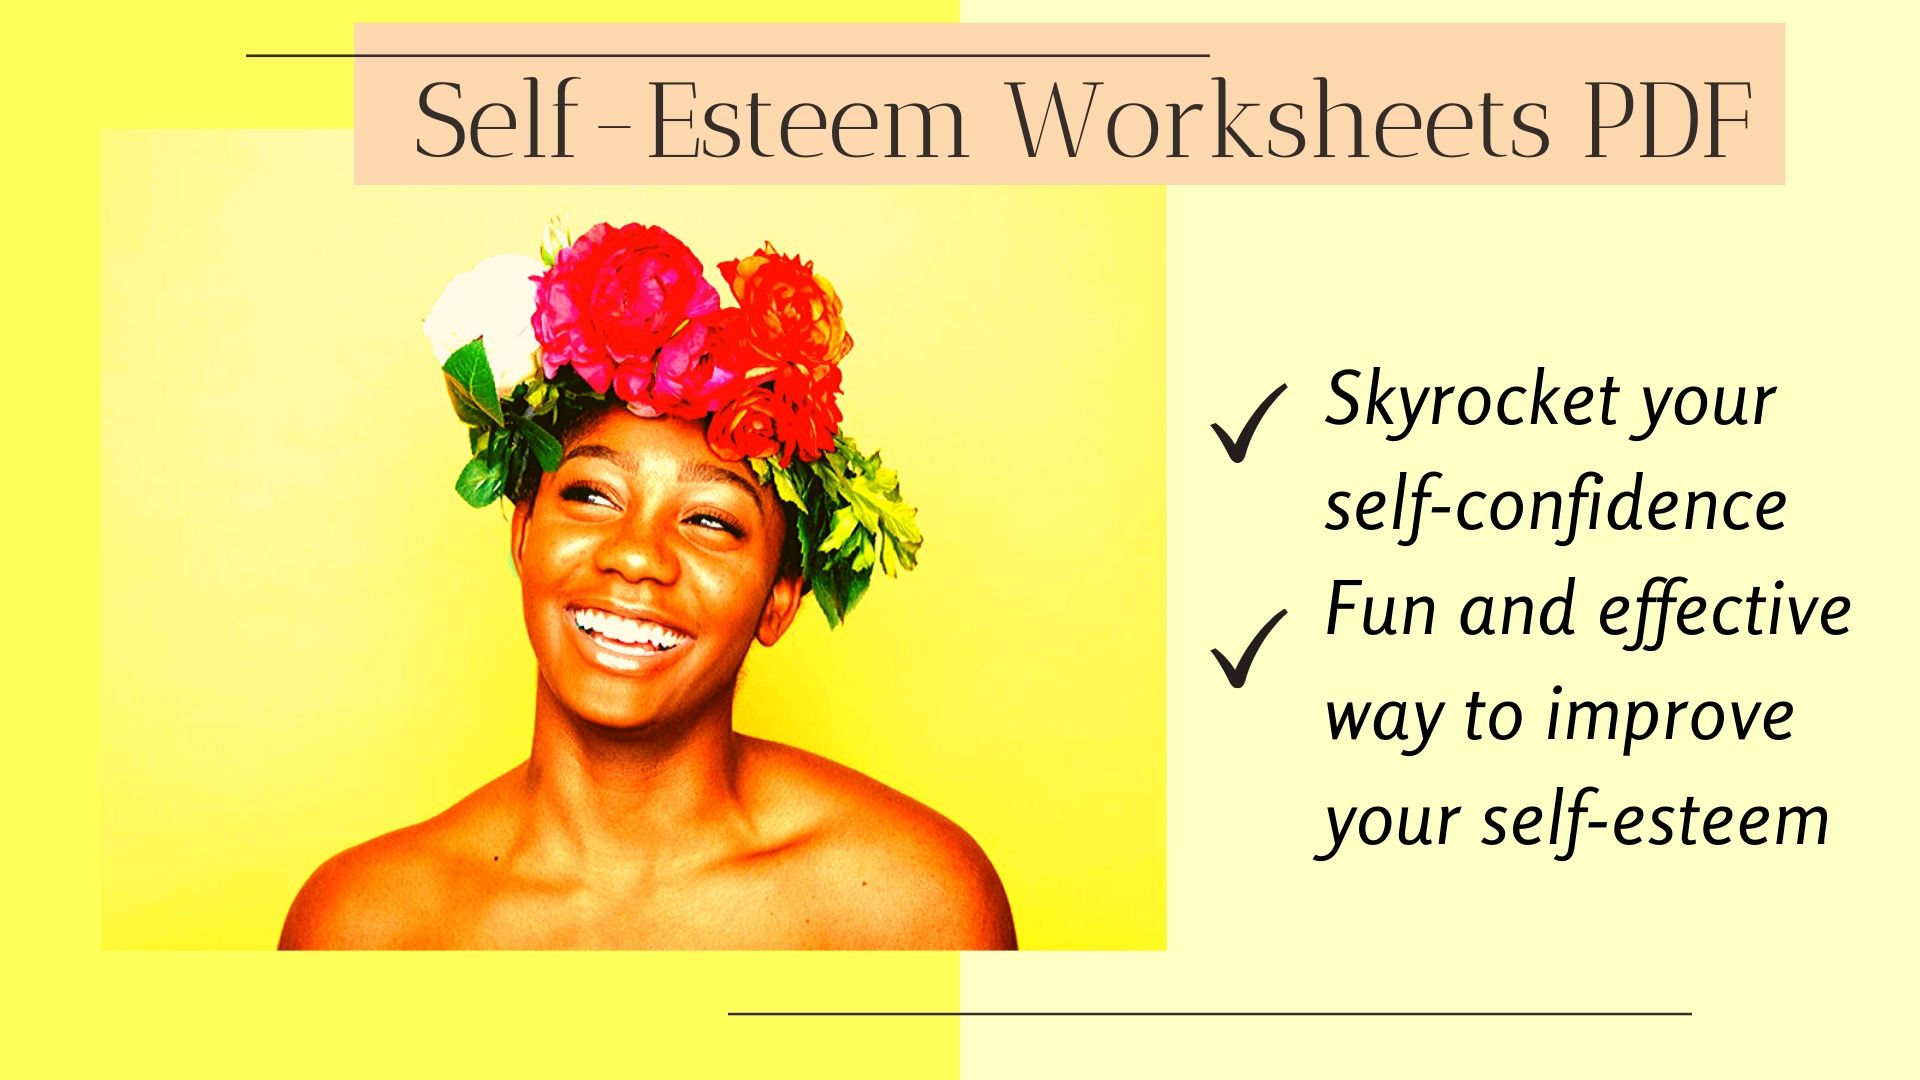 Self-Esteem Worksheets Pdf For Youth And Adults | Benefits